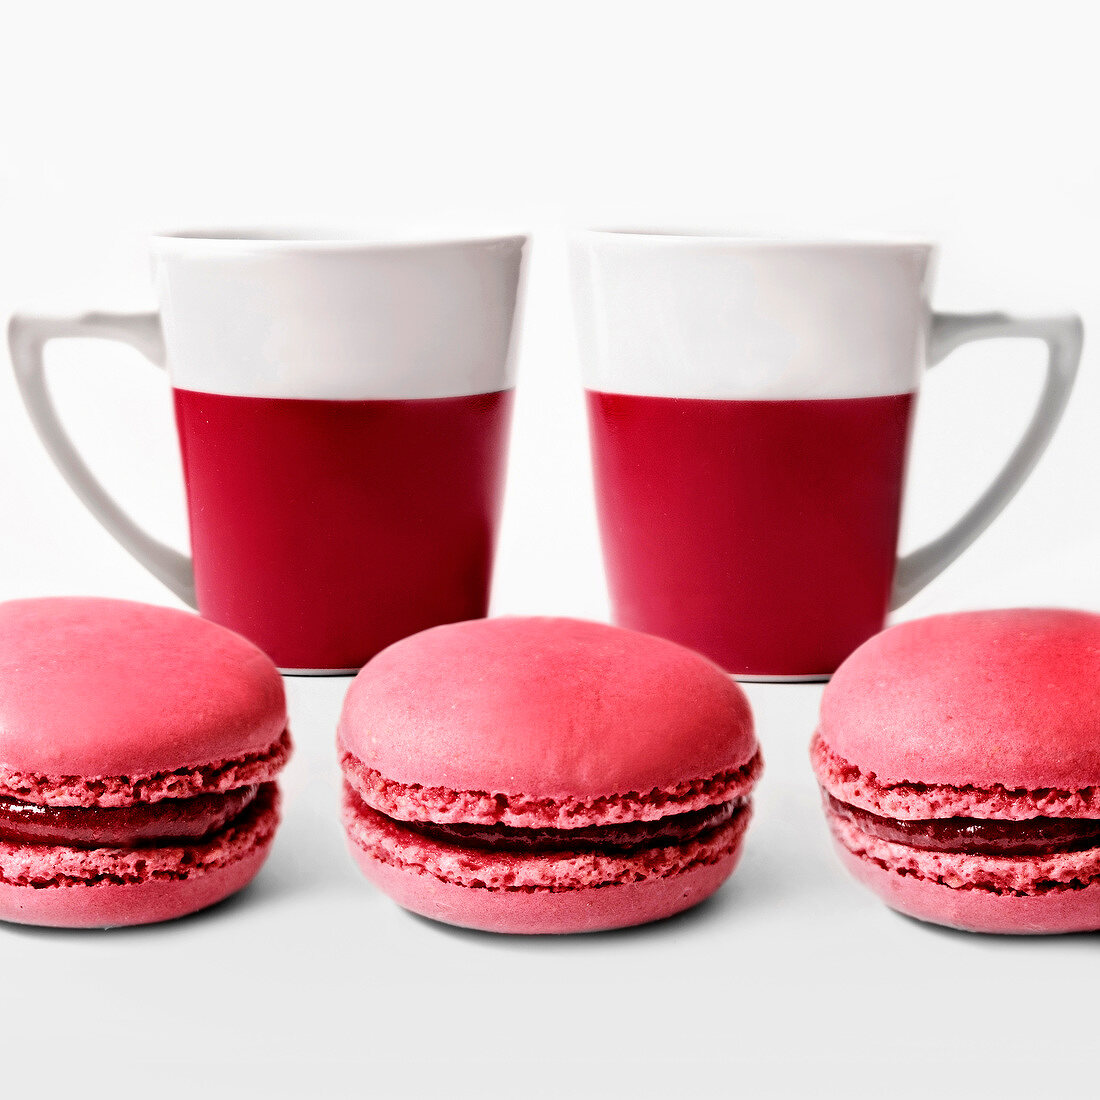 Raspberry macaroons and two cups